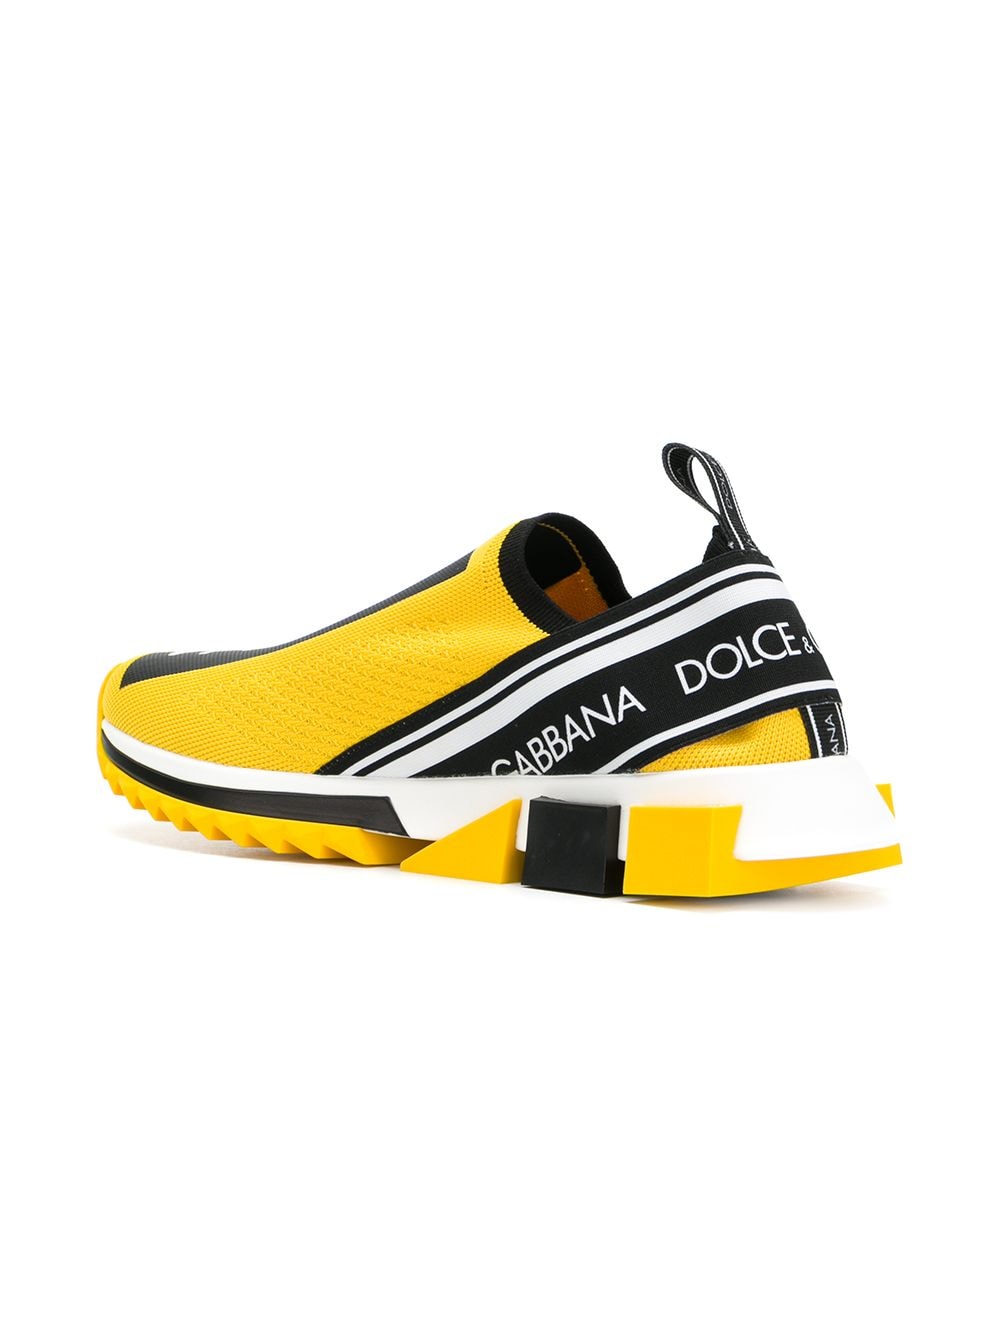 dolce and gabbana shoes yellow